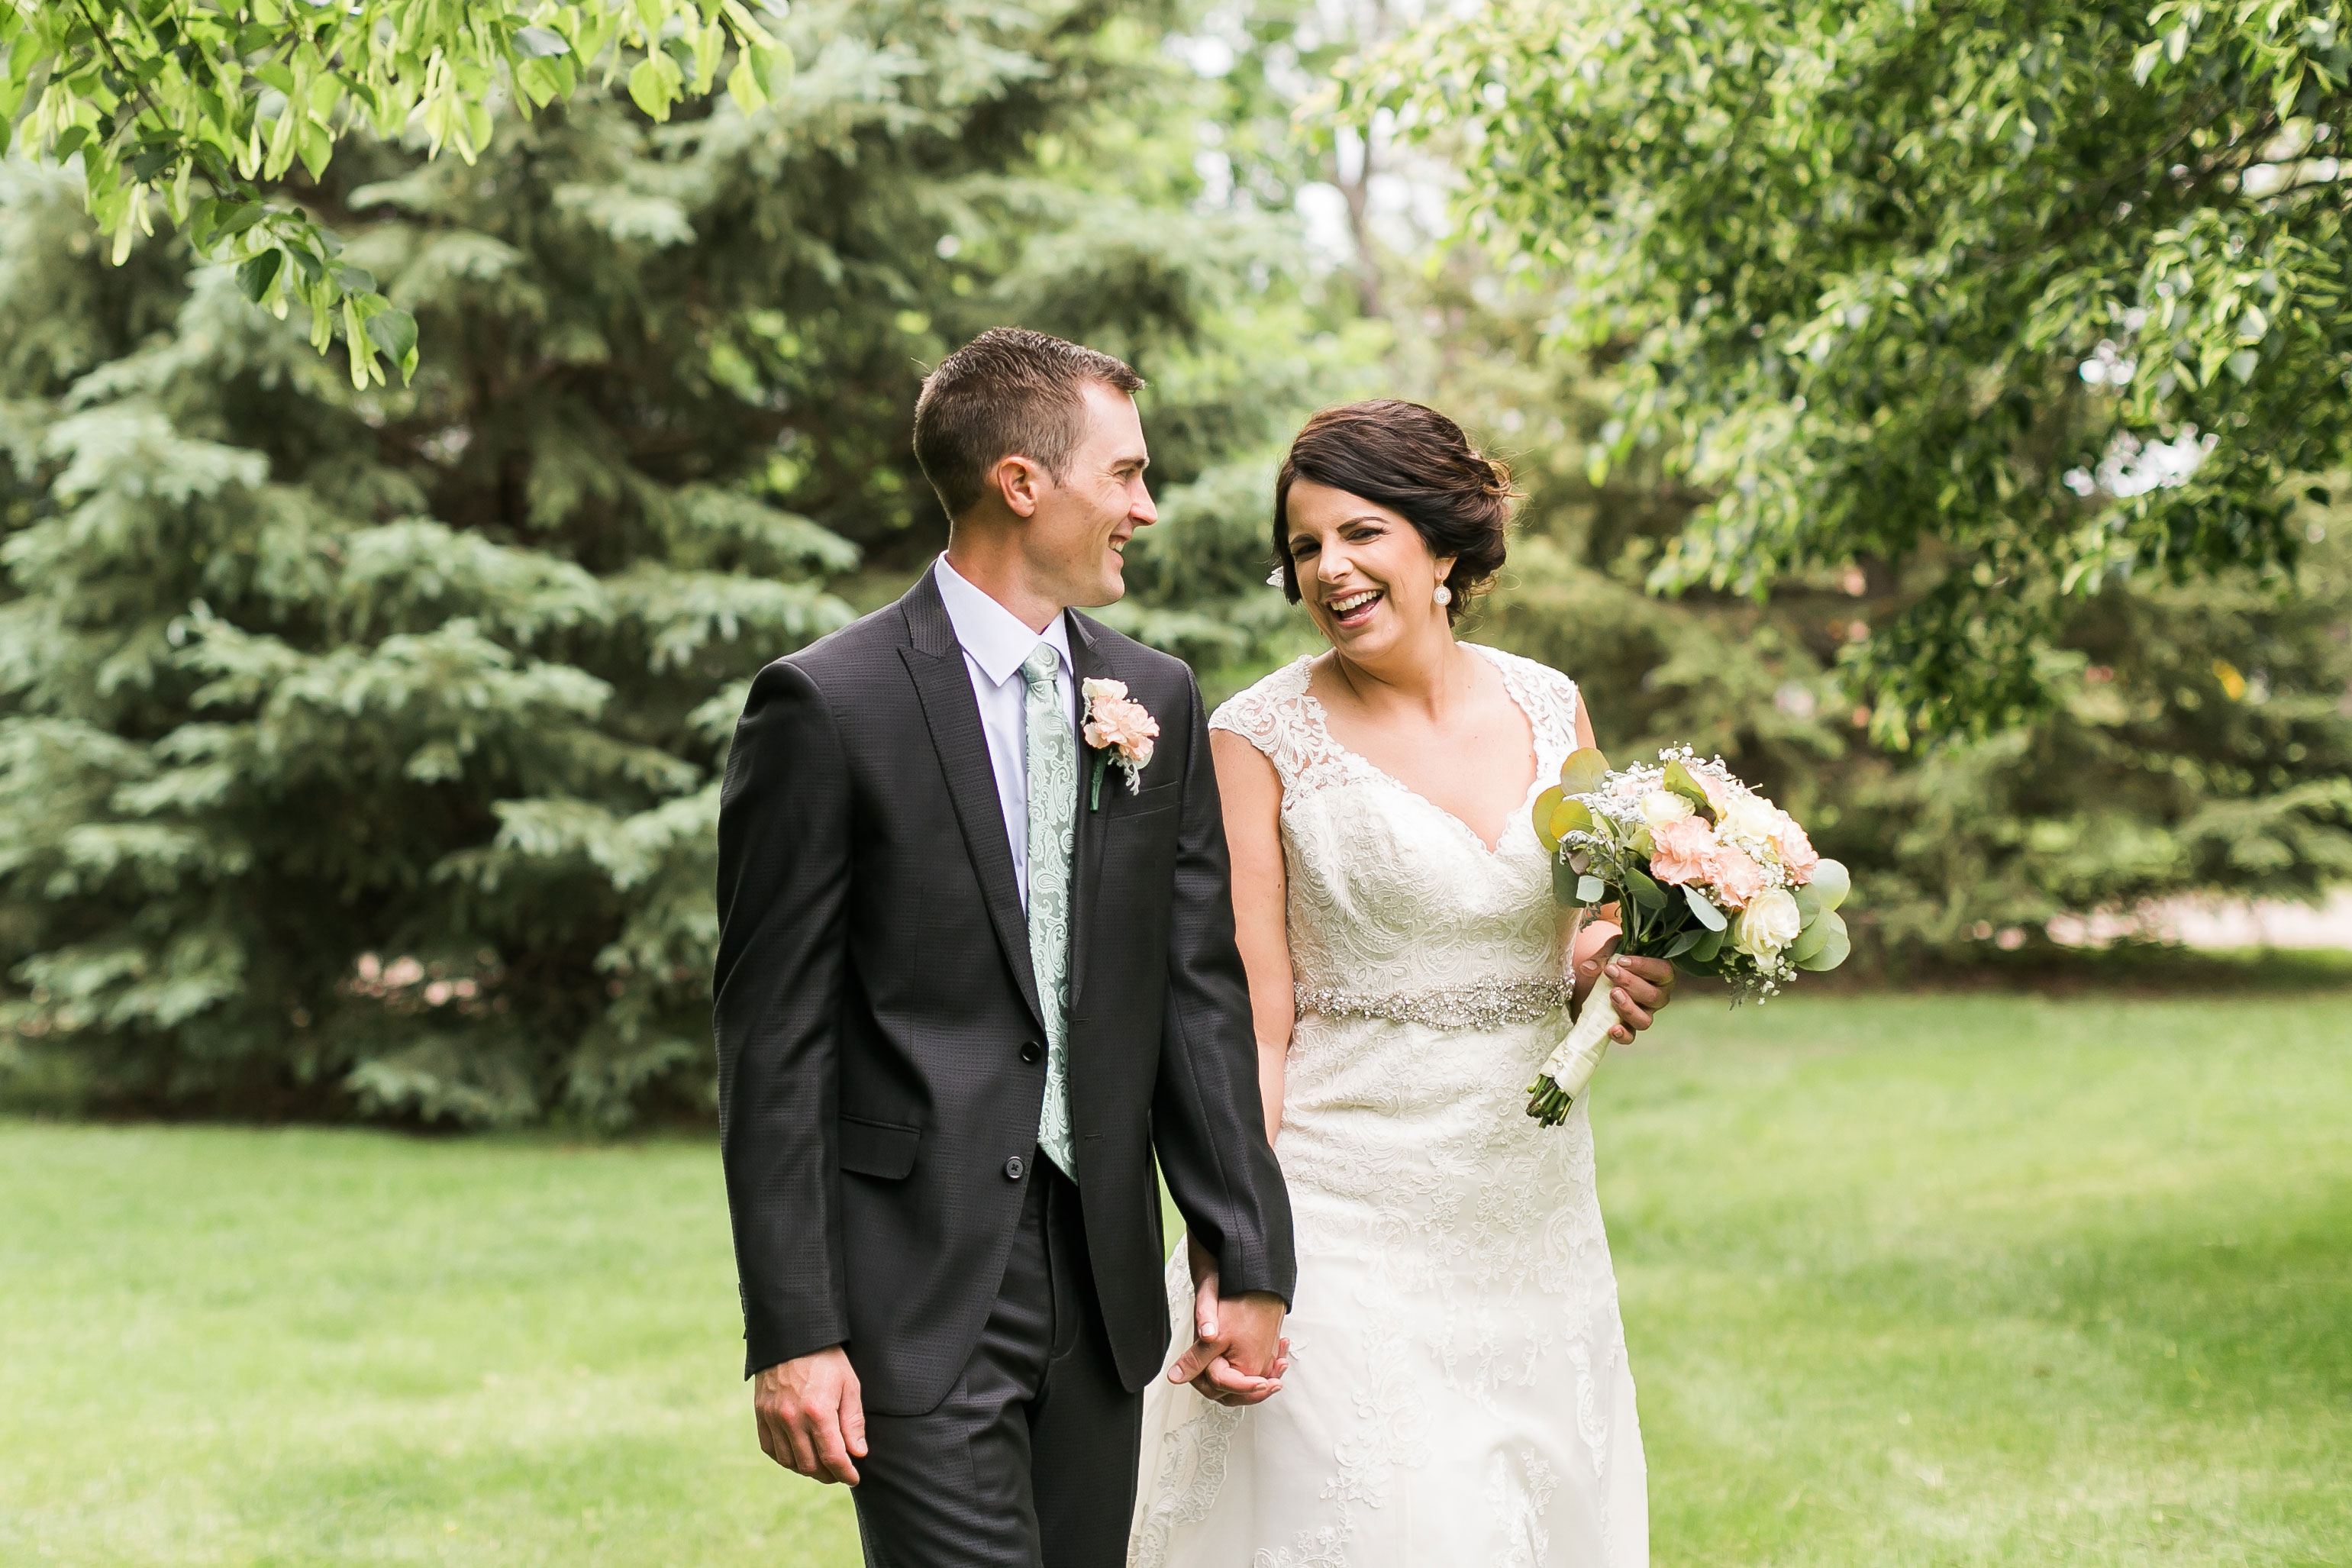 Blush, Mint, and Gray Spring Wedding | Maddie Peschong Photography